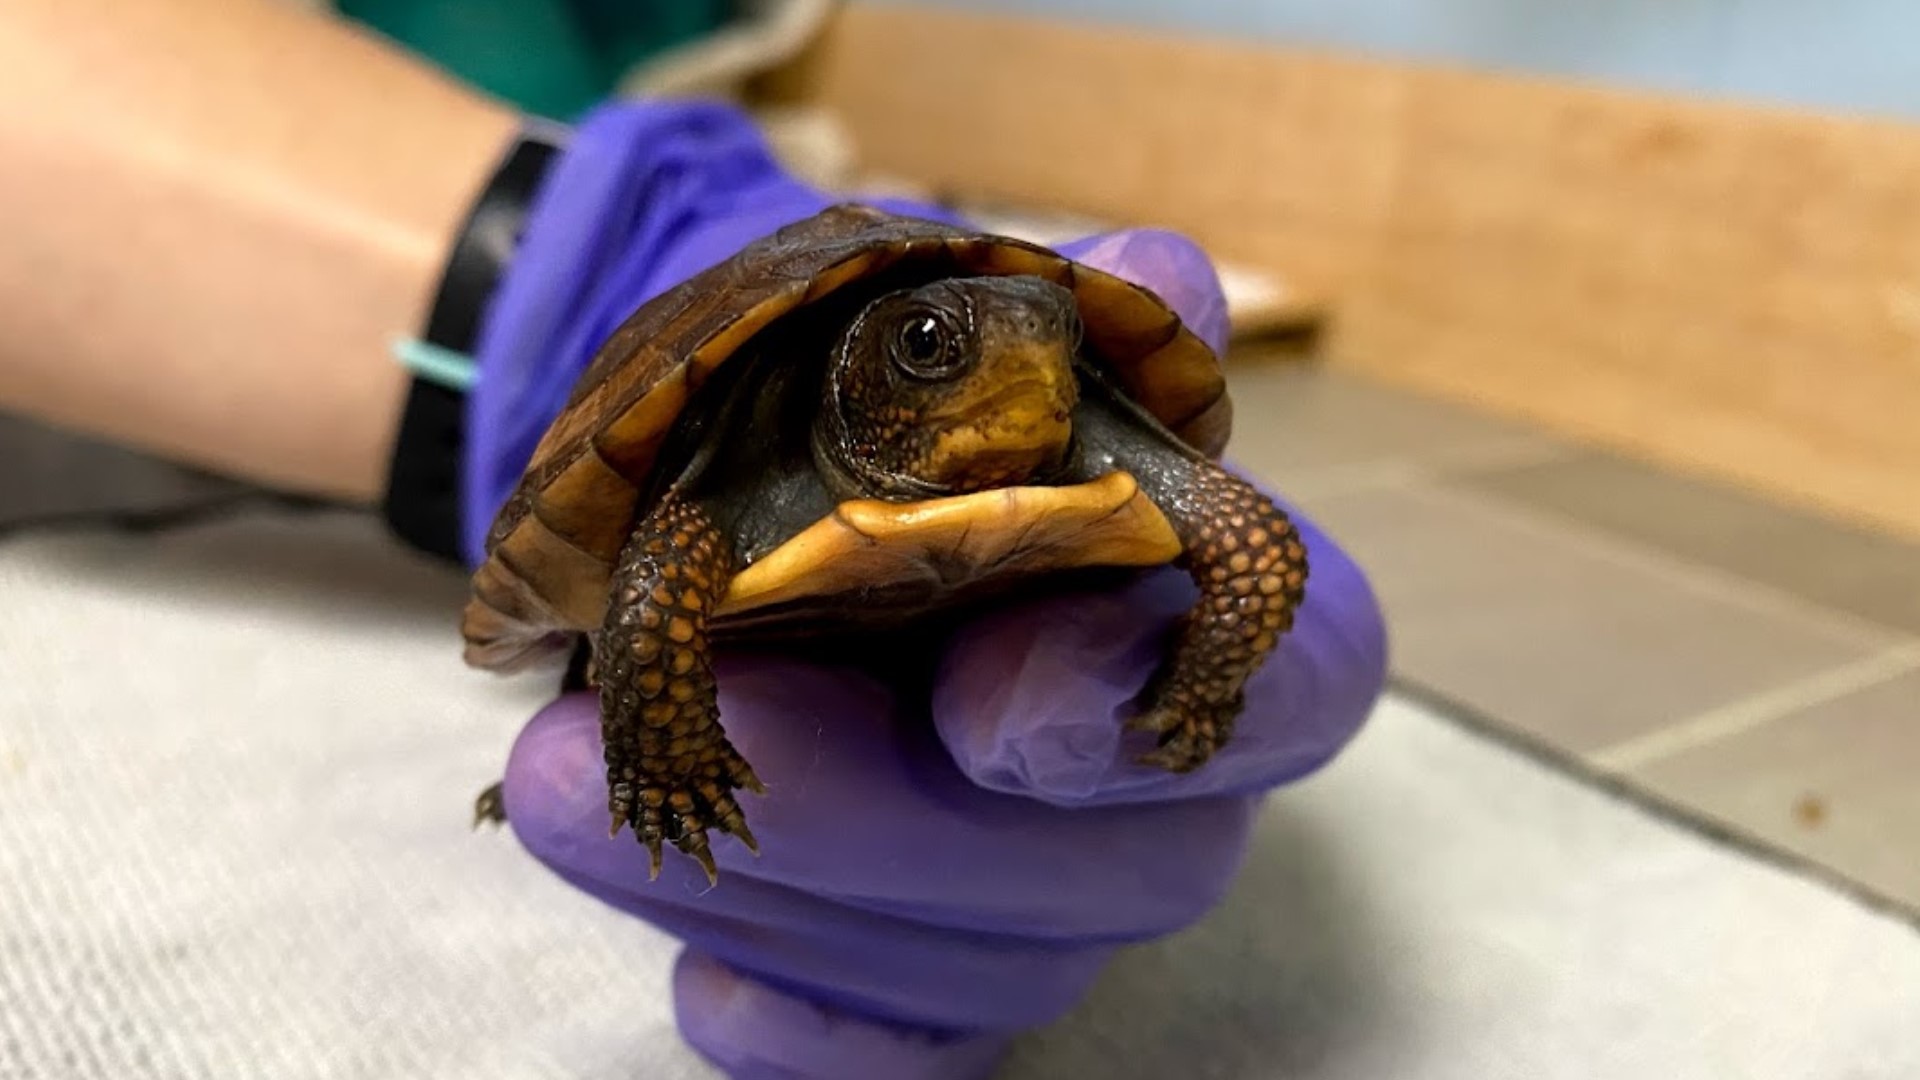 The West Shore Wildlife Center was founded in 2019 to meet the need for more wildlife rehabilitation centers in Pennsylvania, with a focus on prevention.